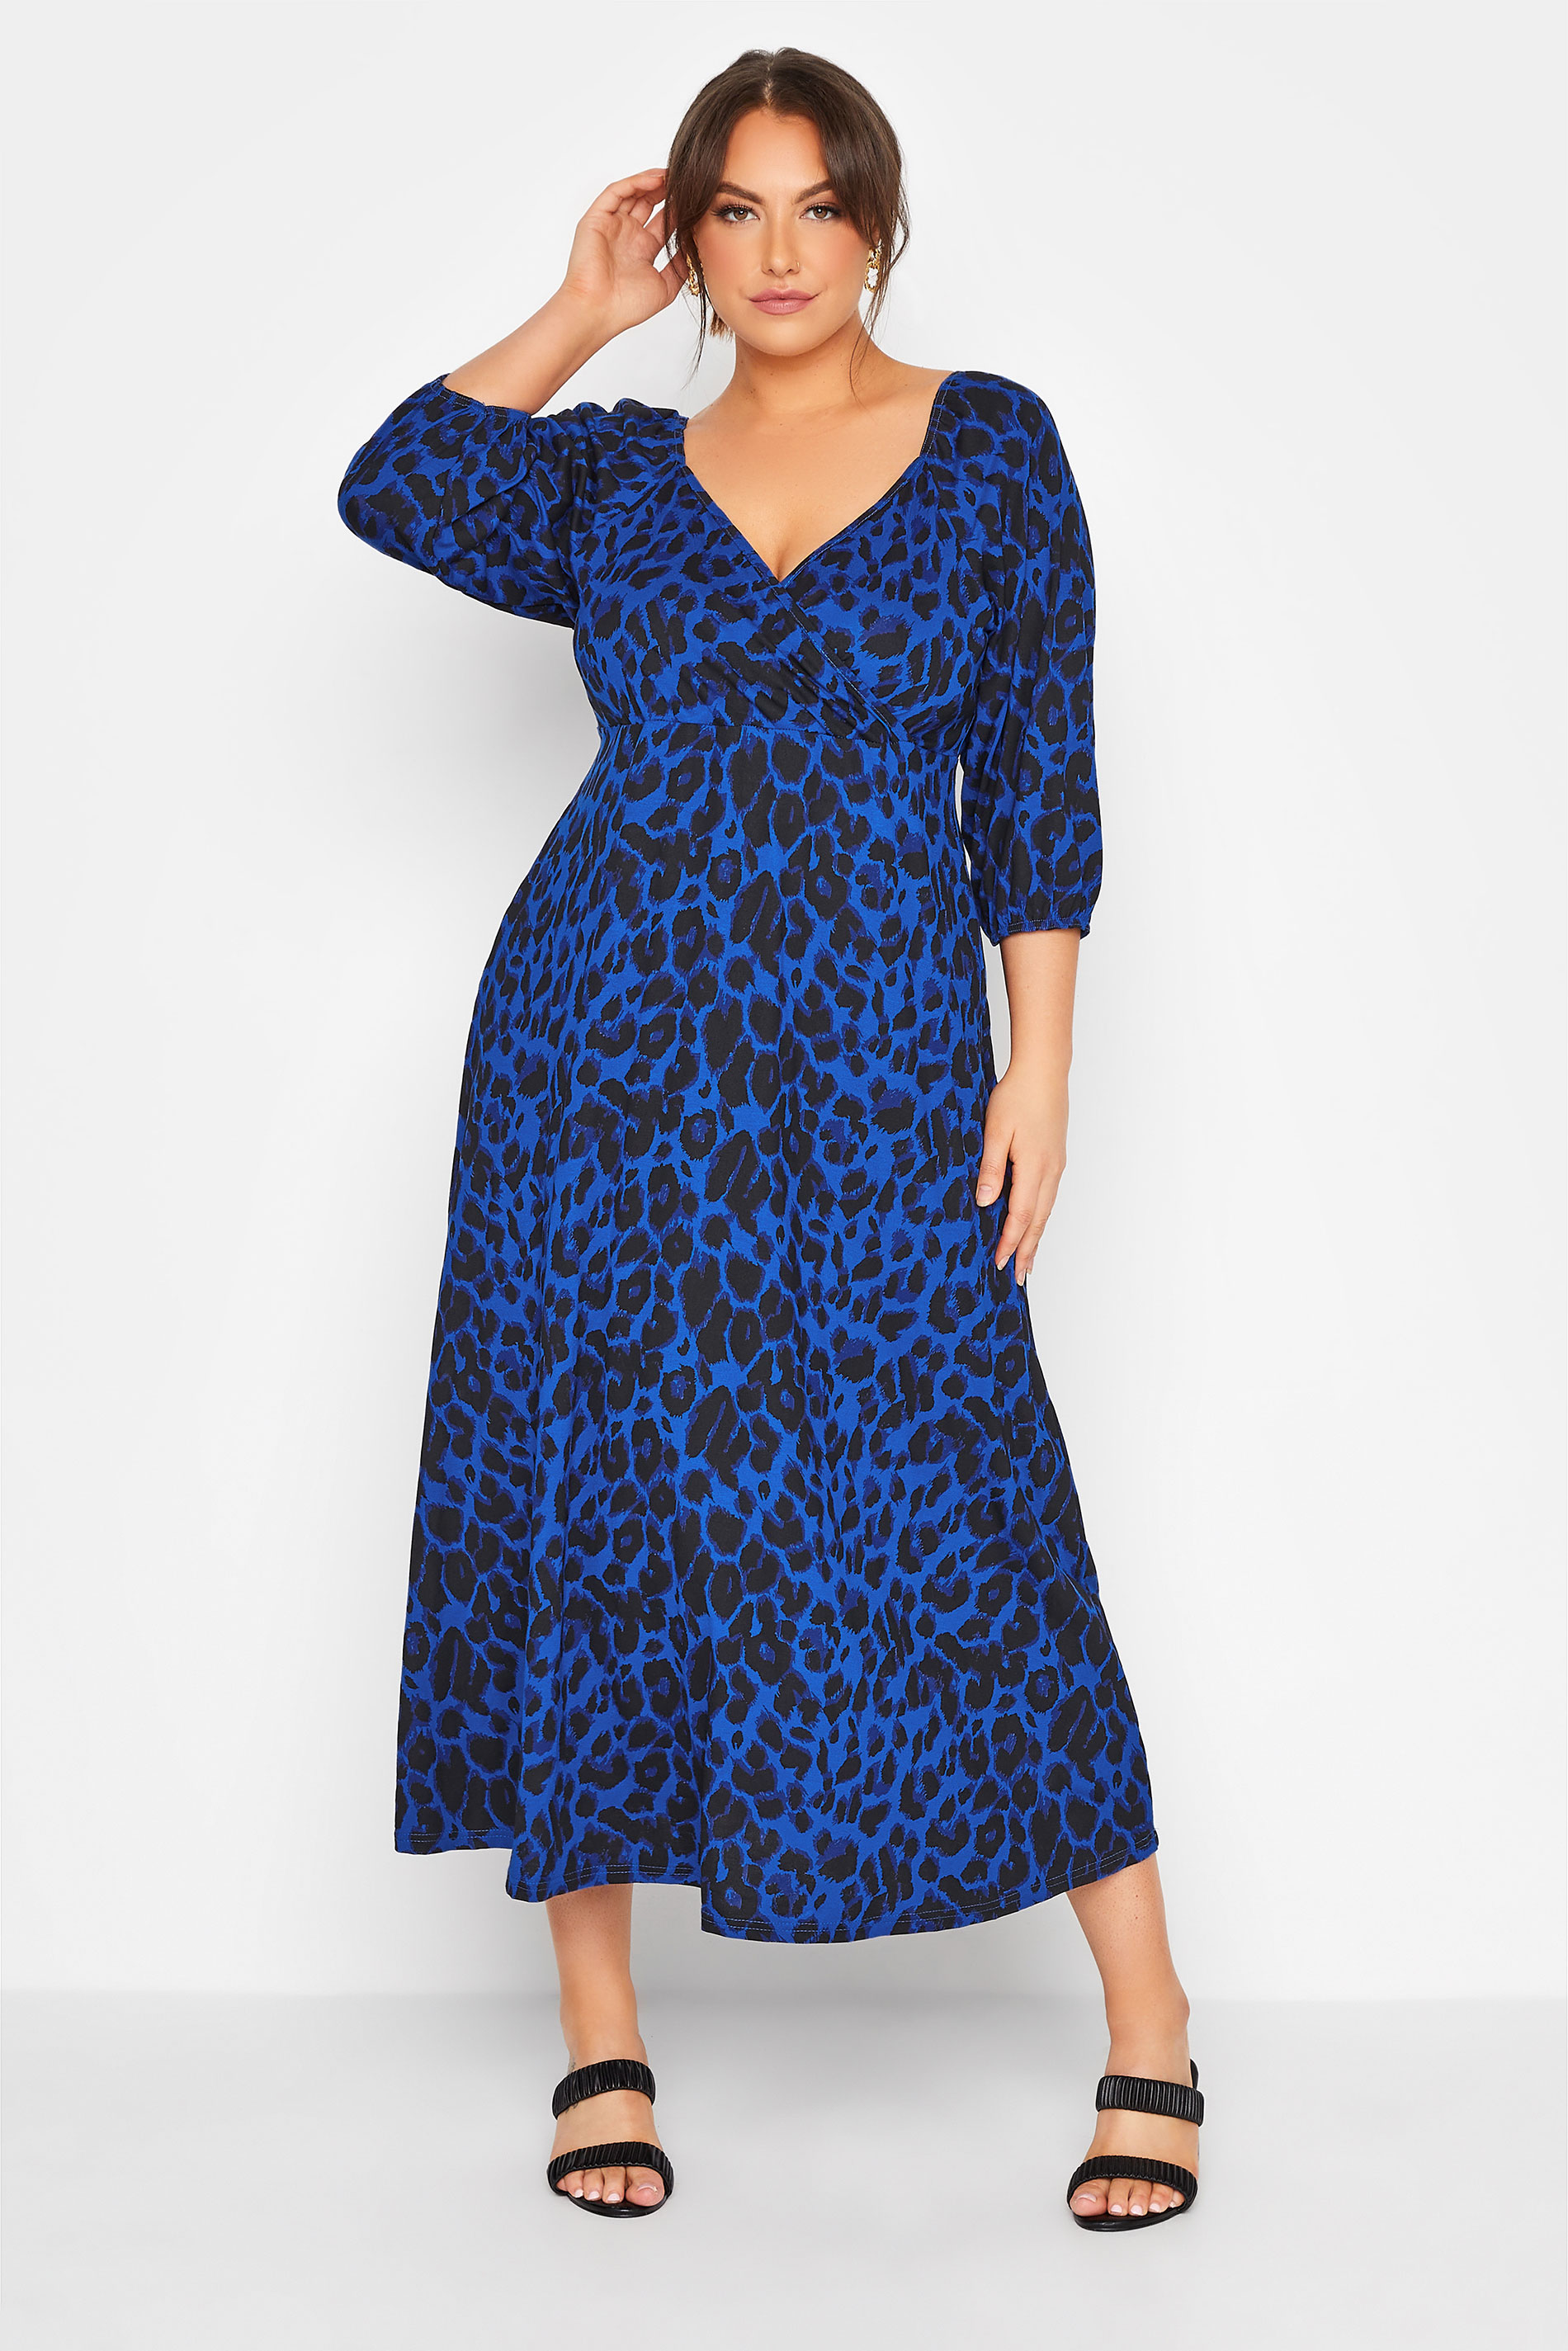 LIMITED COLLECTION Curve Navy Blue Leopard Print Wrap Milkmaid Dress_A.jpg